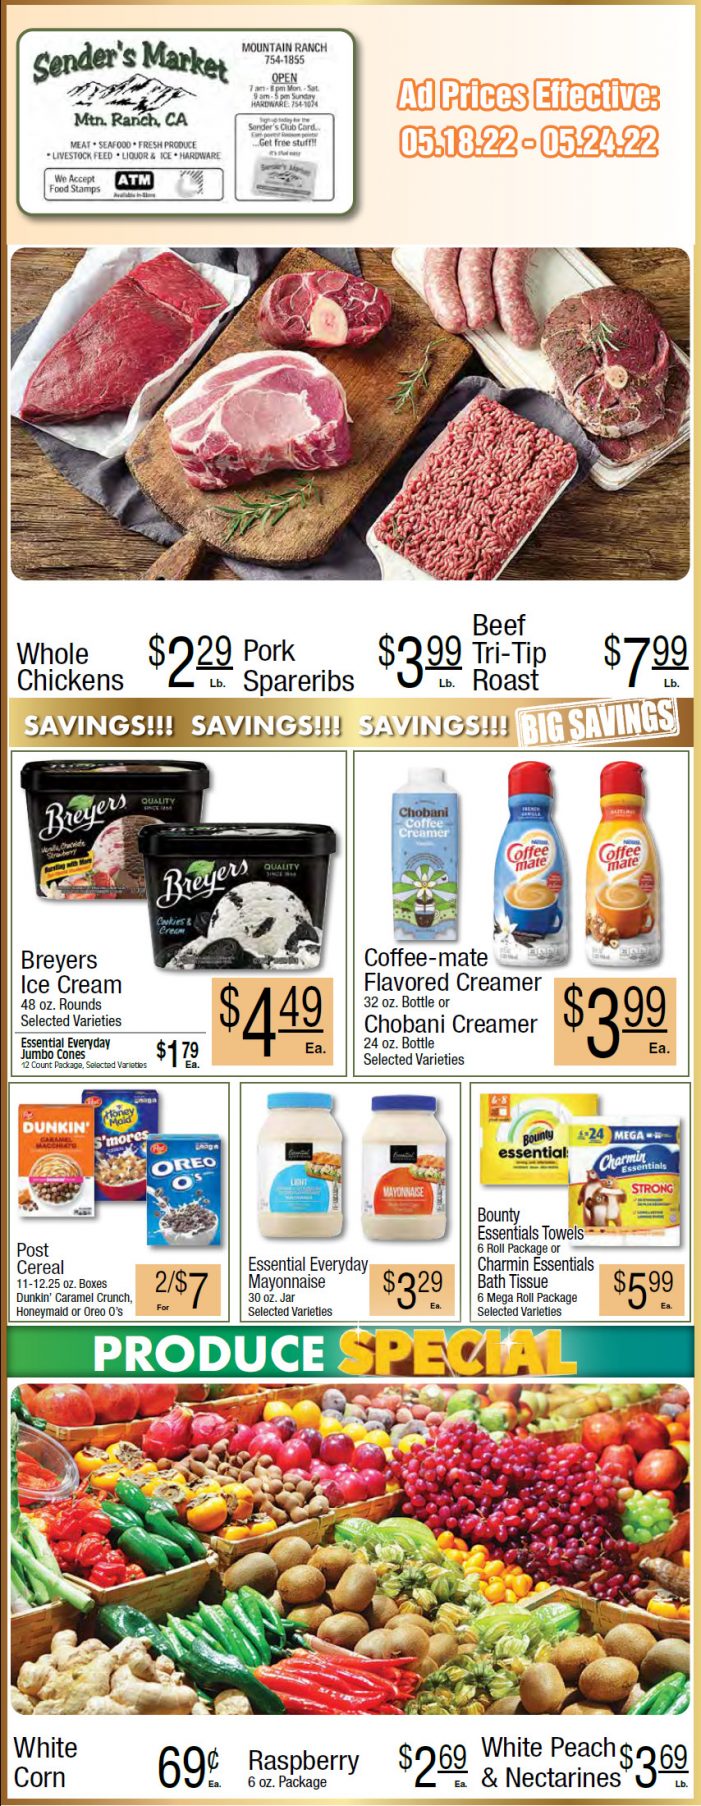 Sender’s Market Weekly Ad & Grocery Specials Through May 24th! Shop Local & Save!